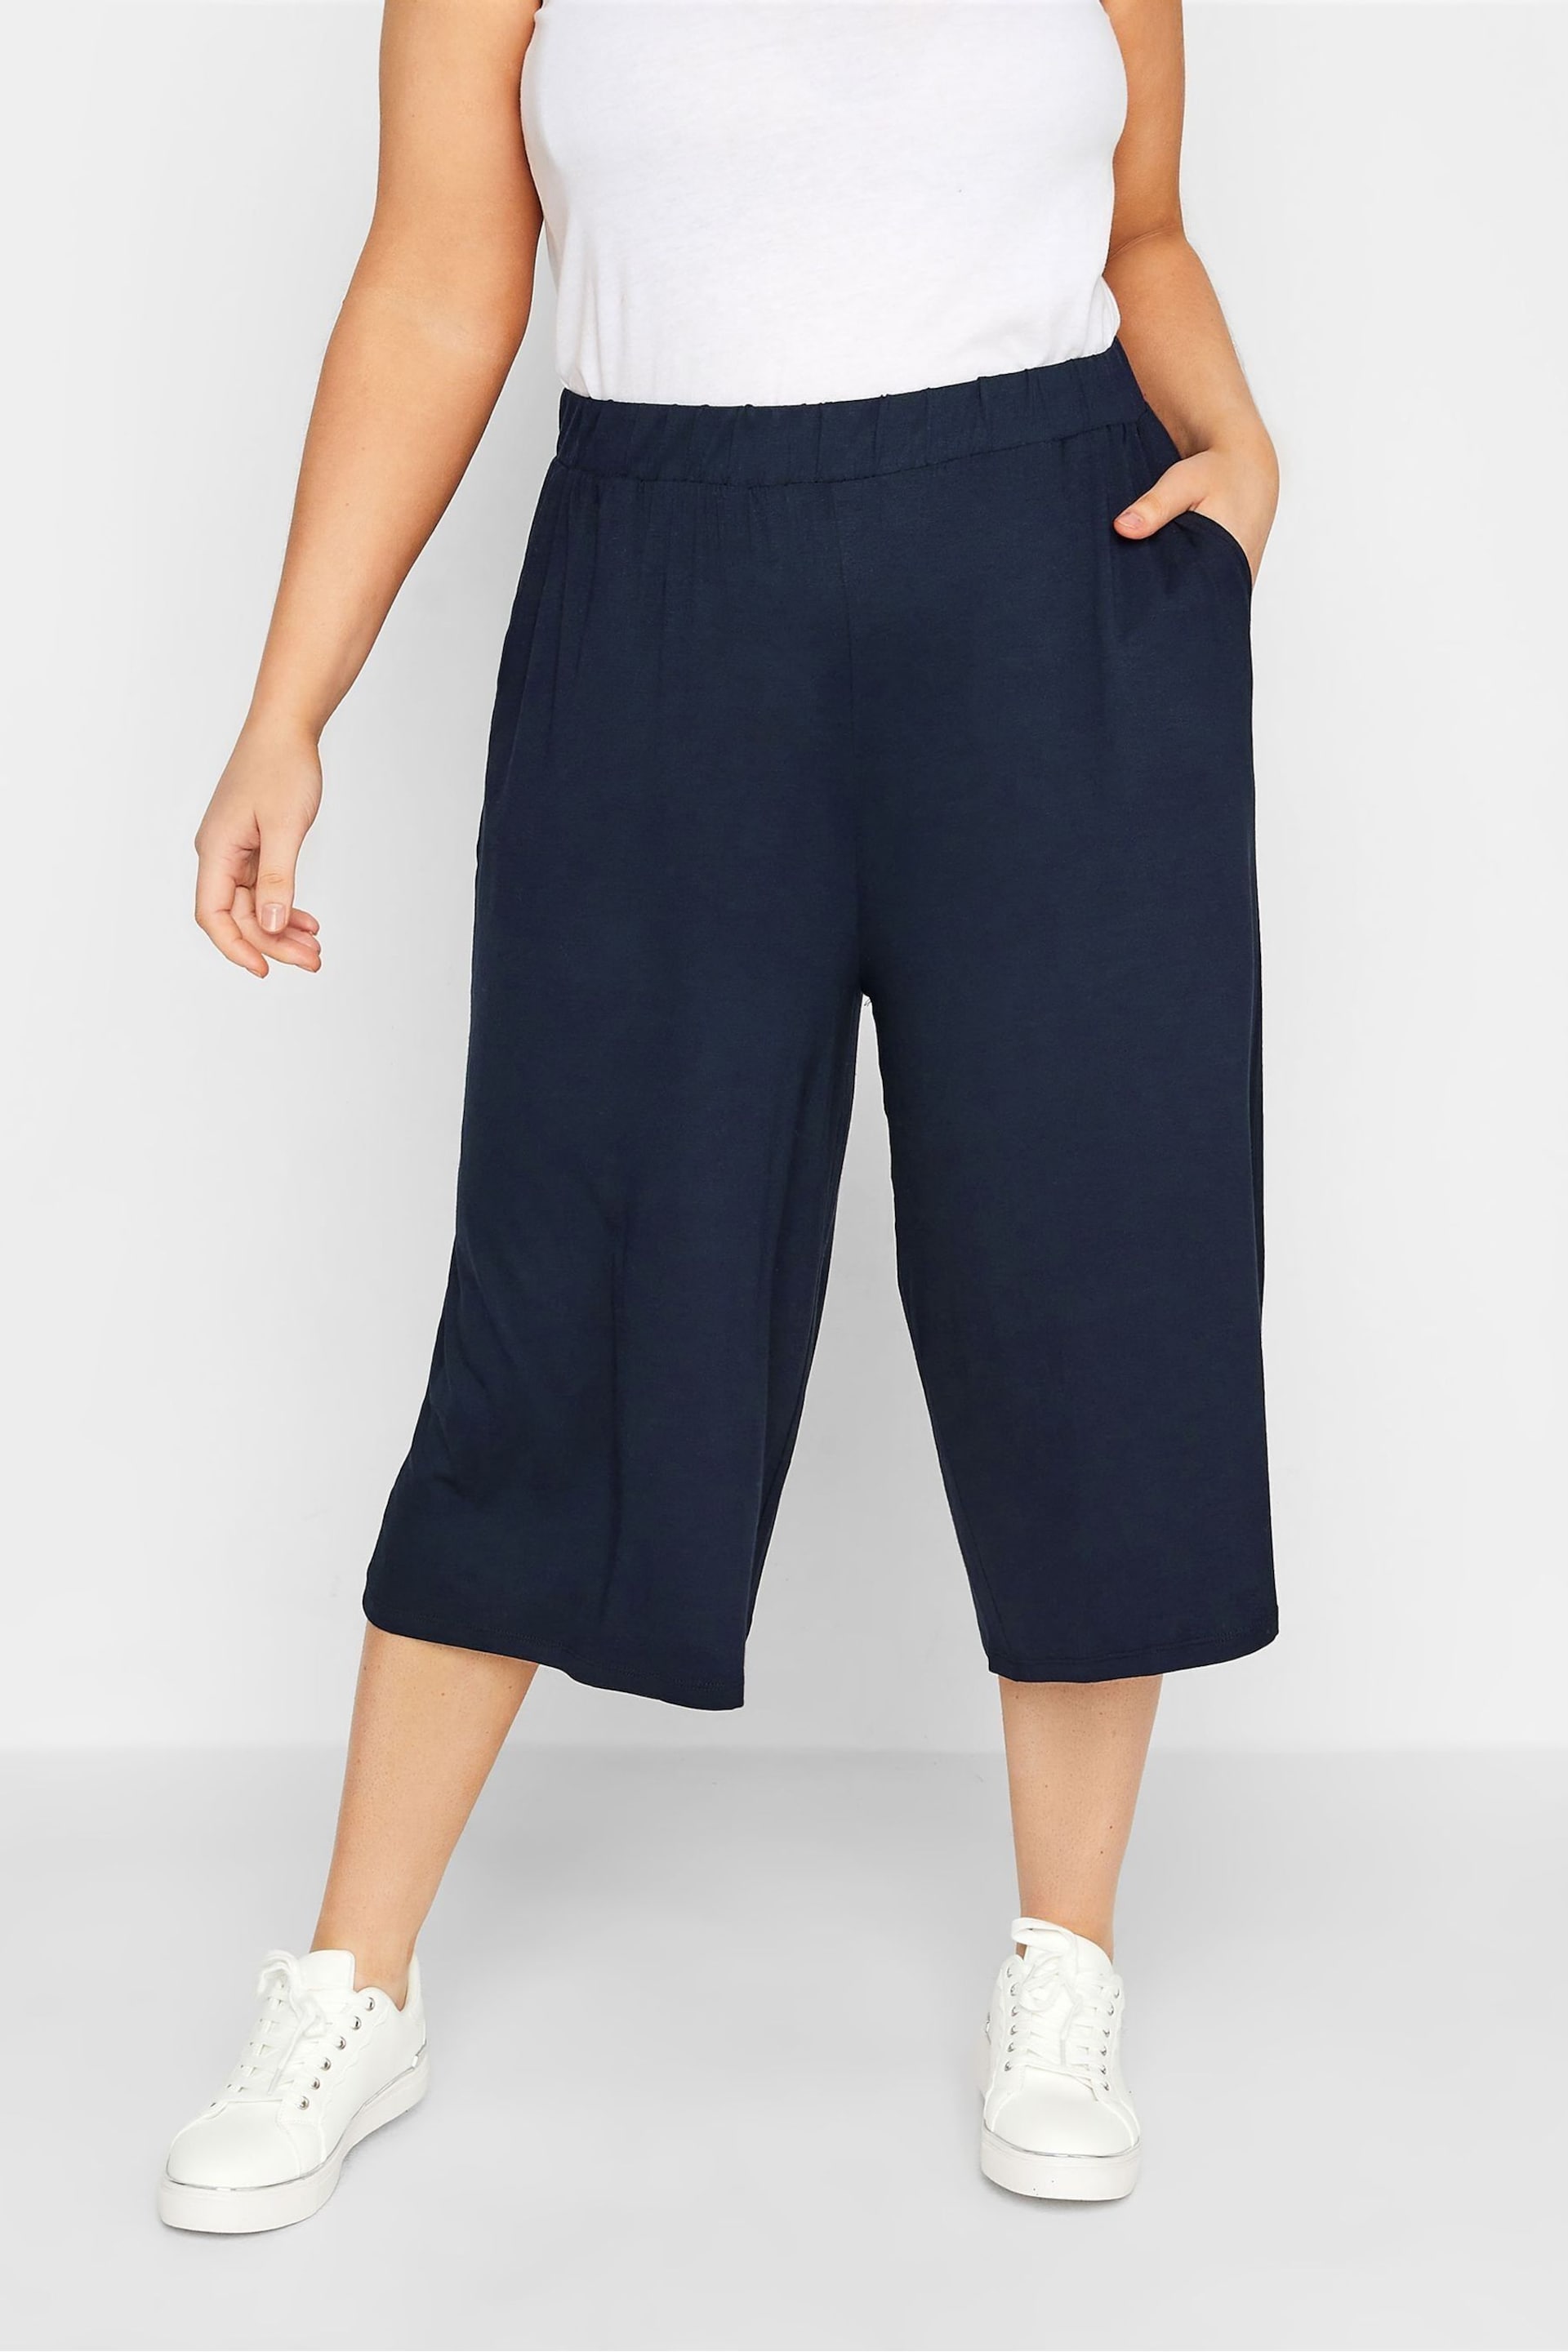 Yours Curve Blue Jersey Culottes - Image 1 of 5